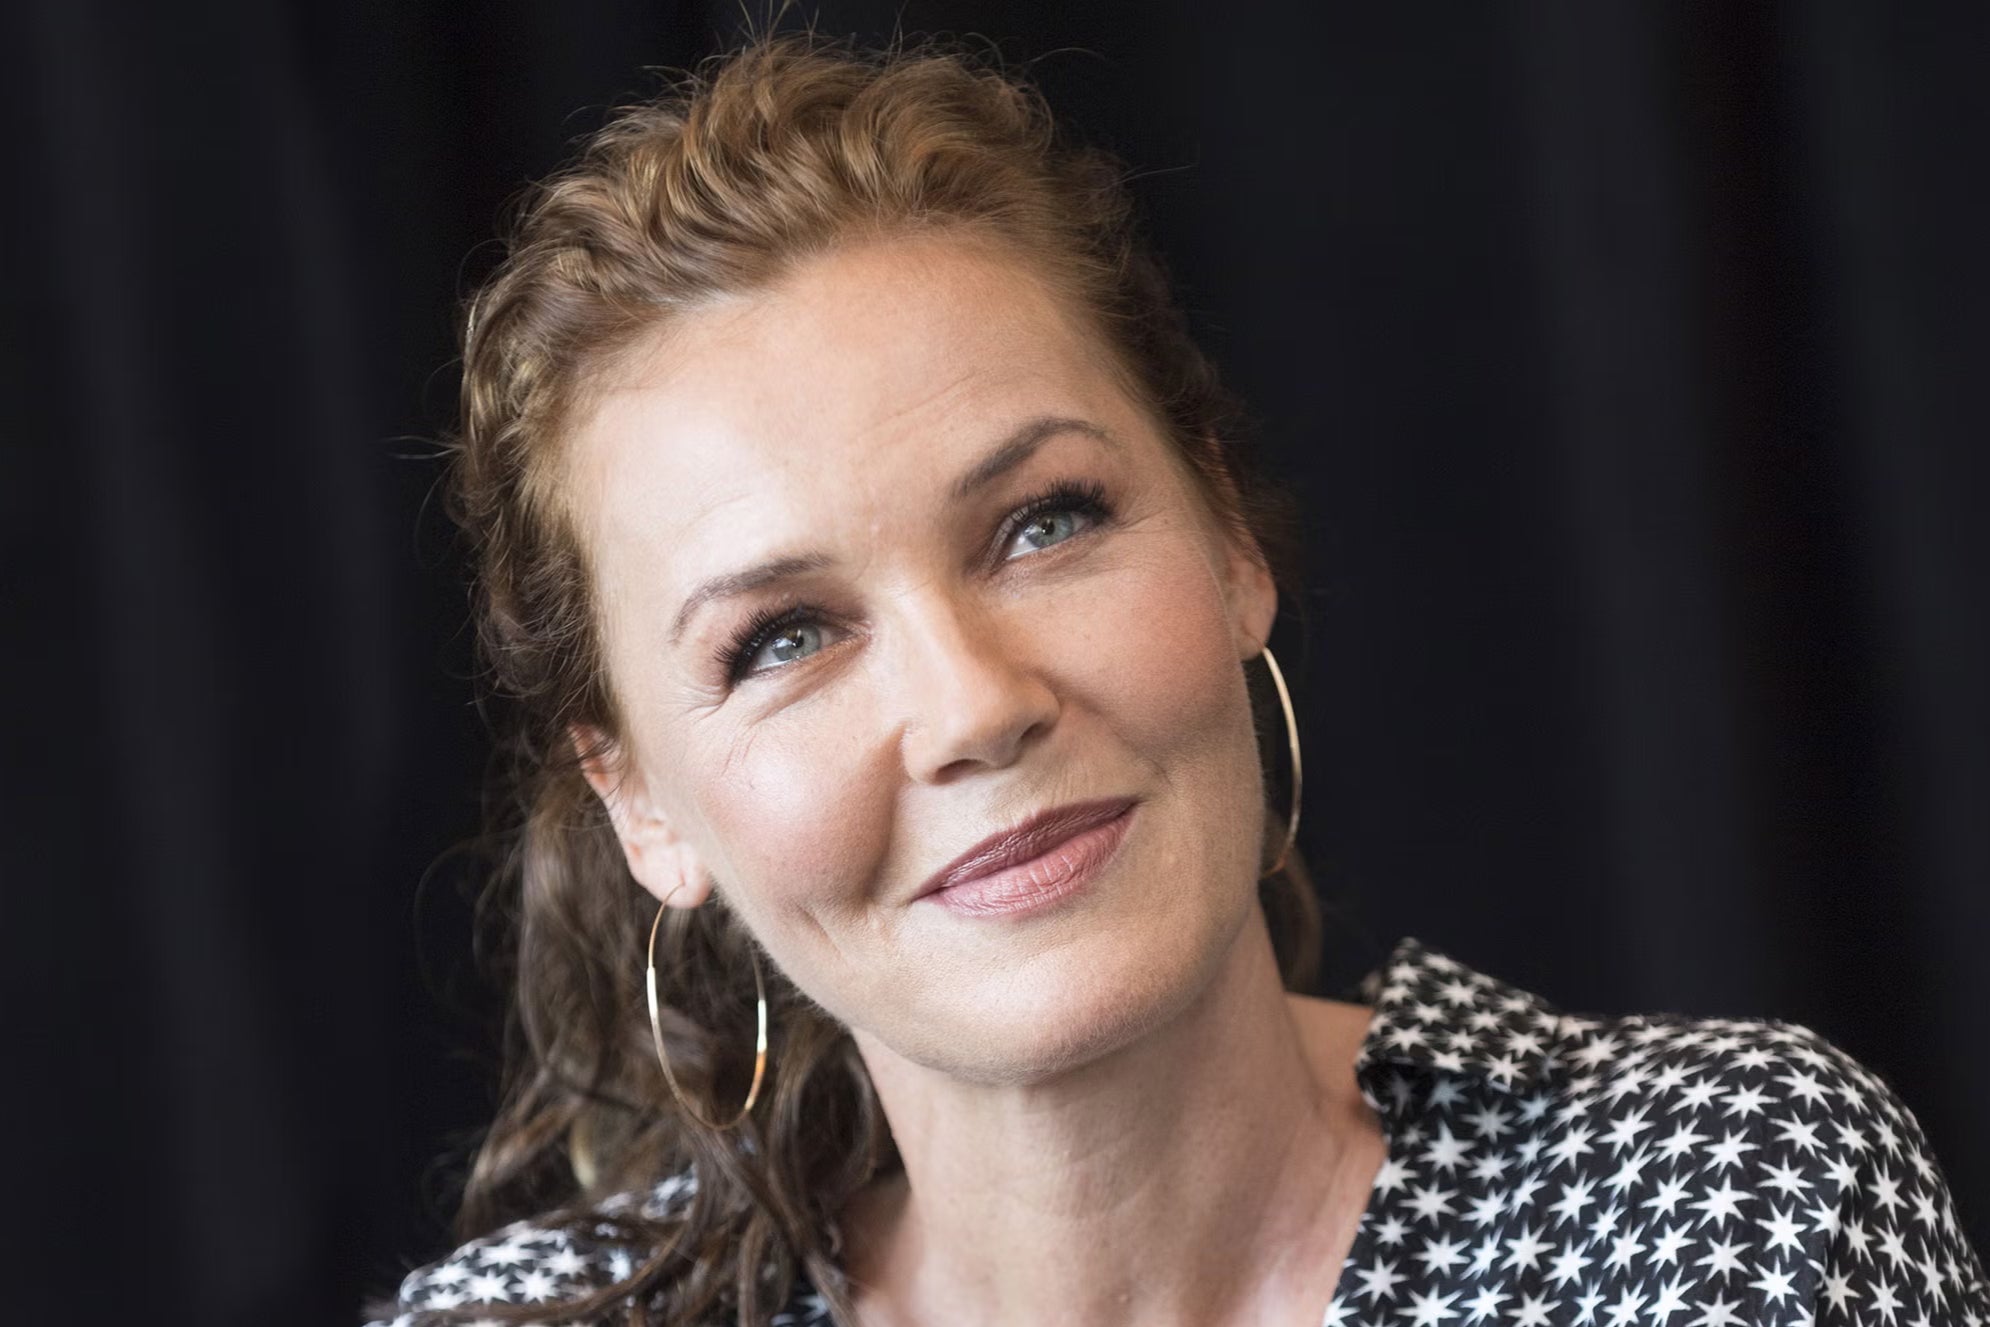 Connie Nielsen Interview ‘i Ve Been The Token Woman In So Many Films It Annoys The S T Outta